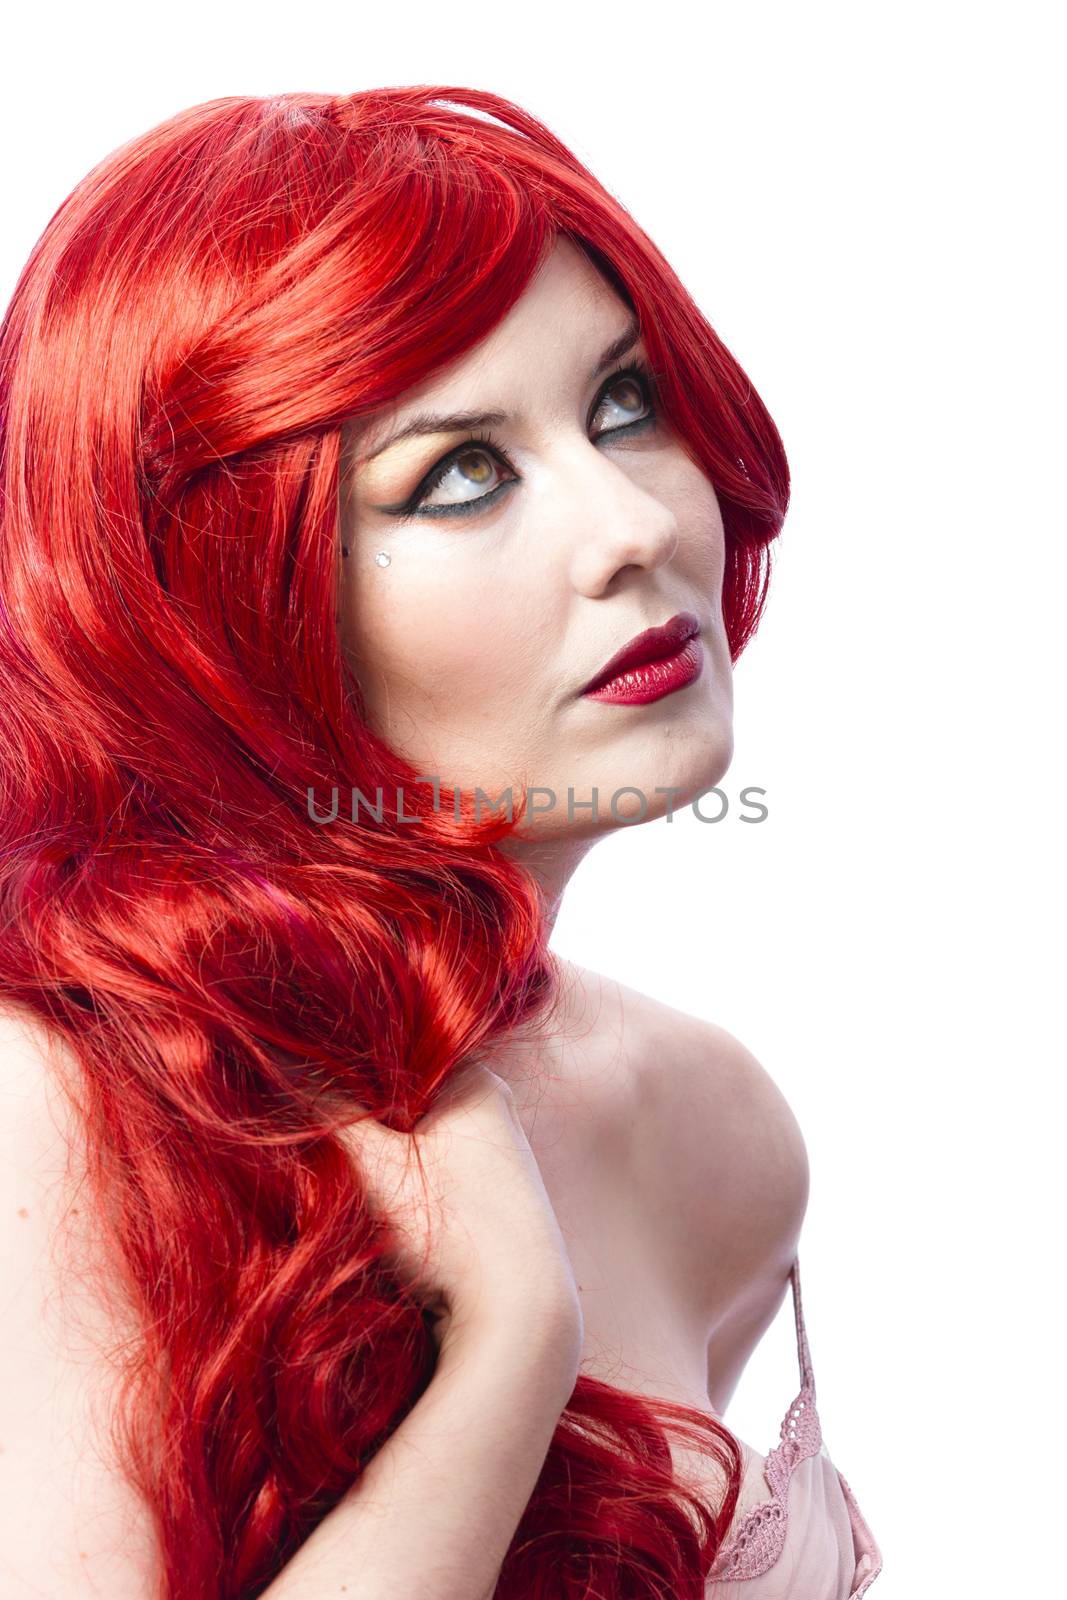 Cute and beautiful girl with wavy red hair caressing his cheek by FernandoCortes